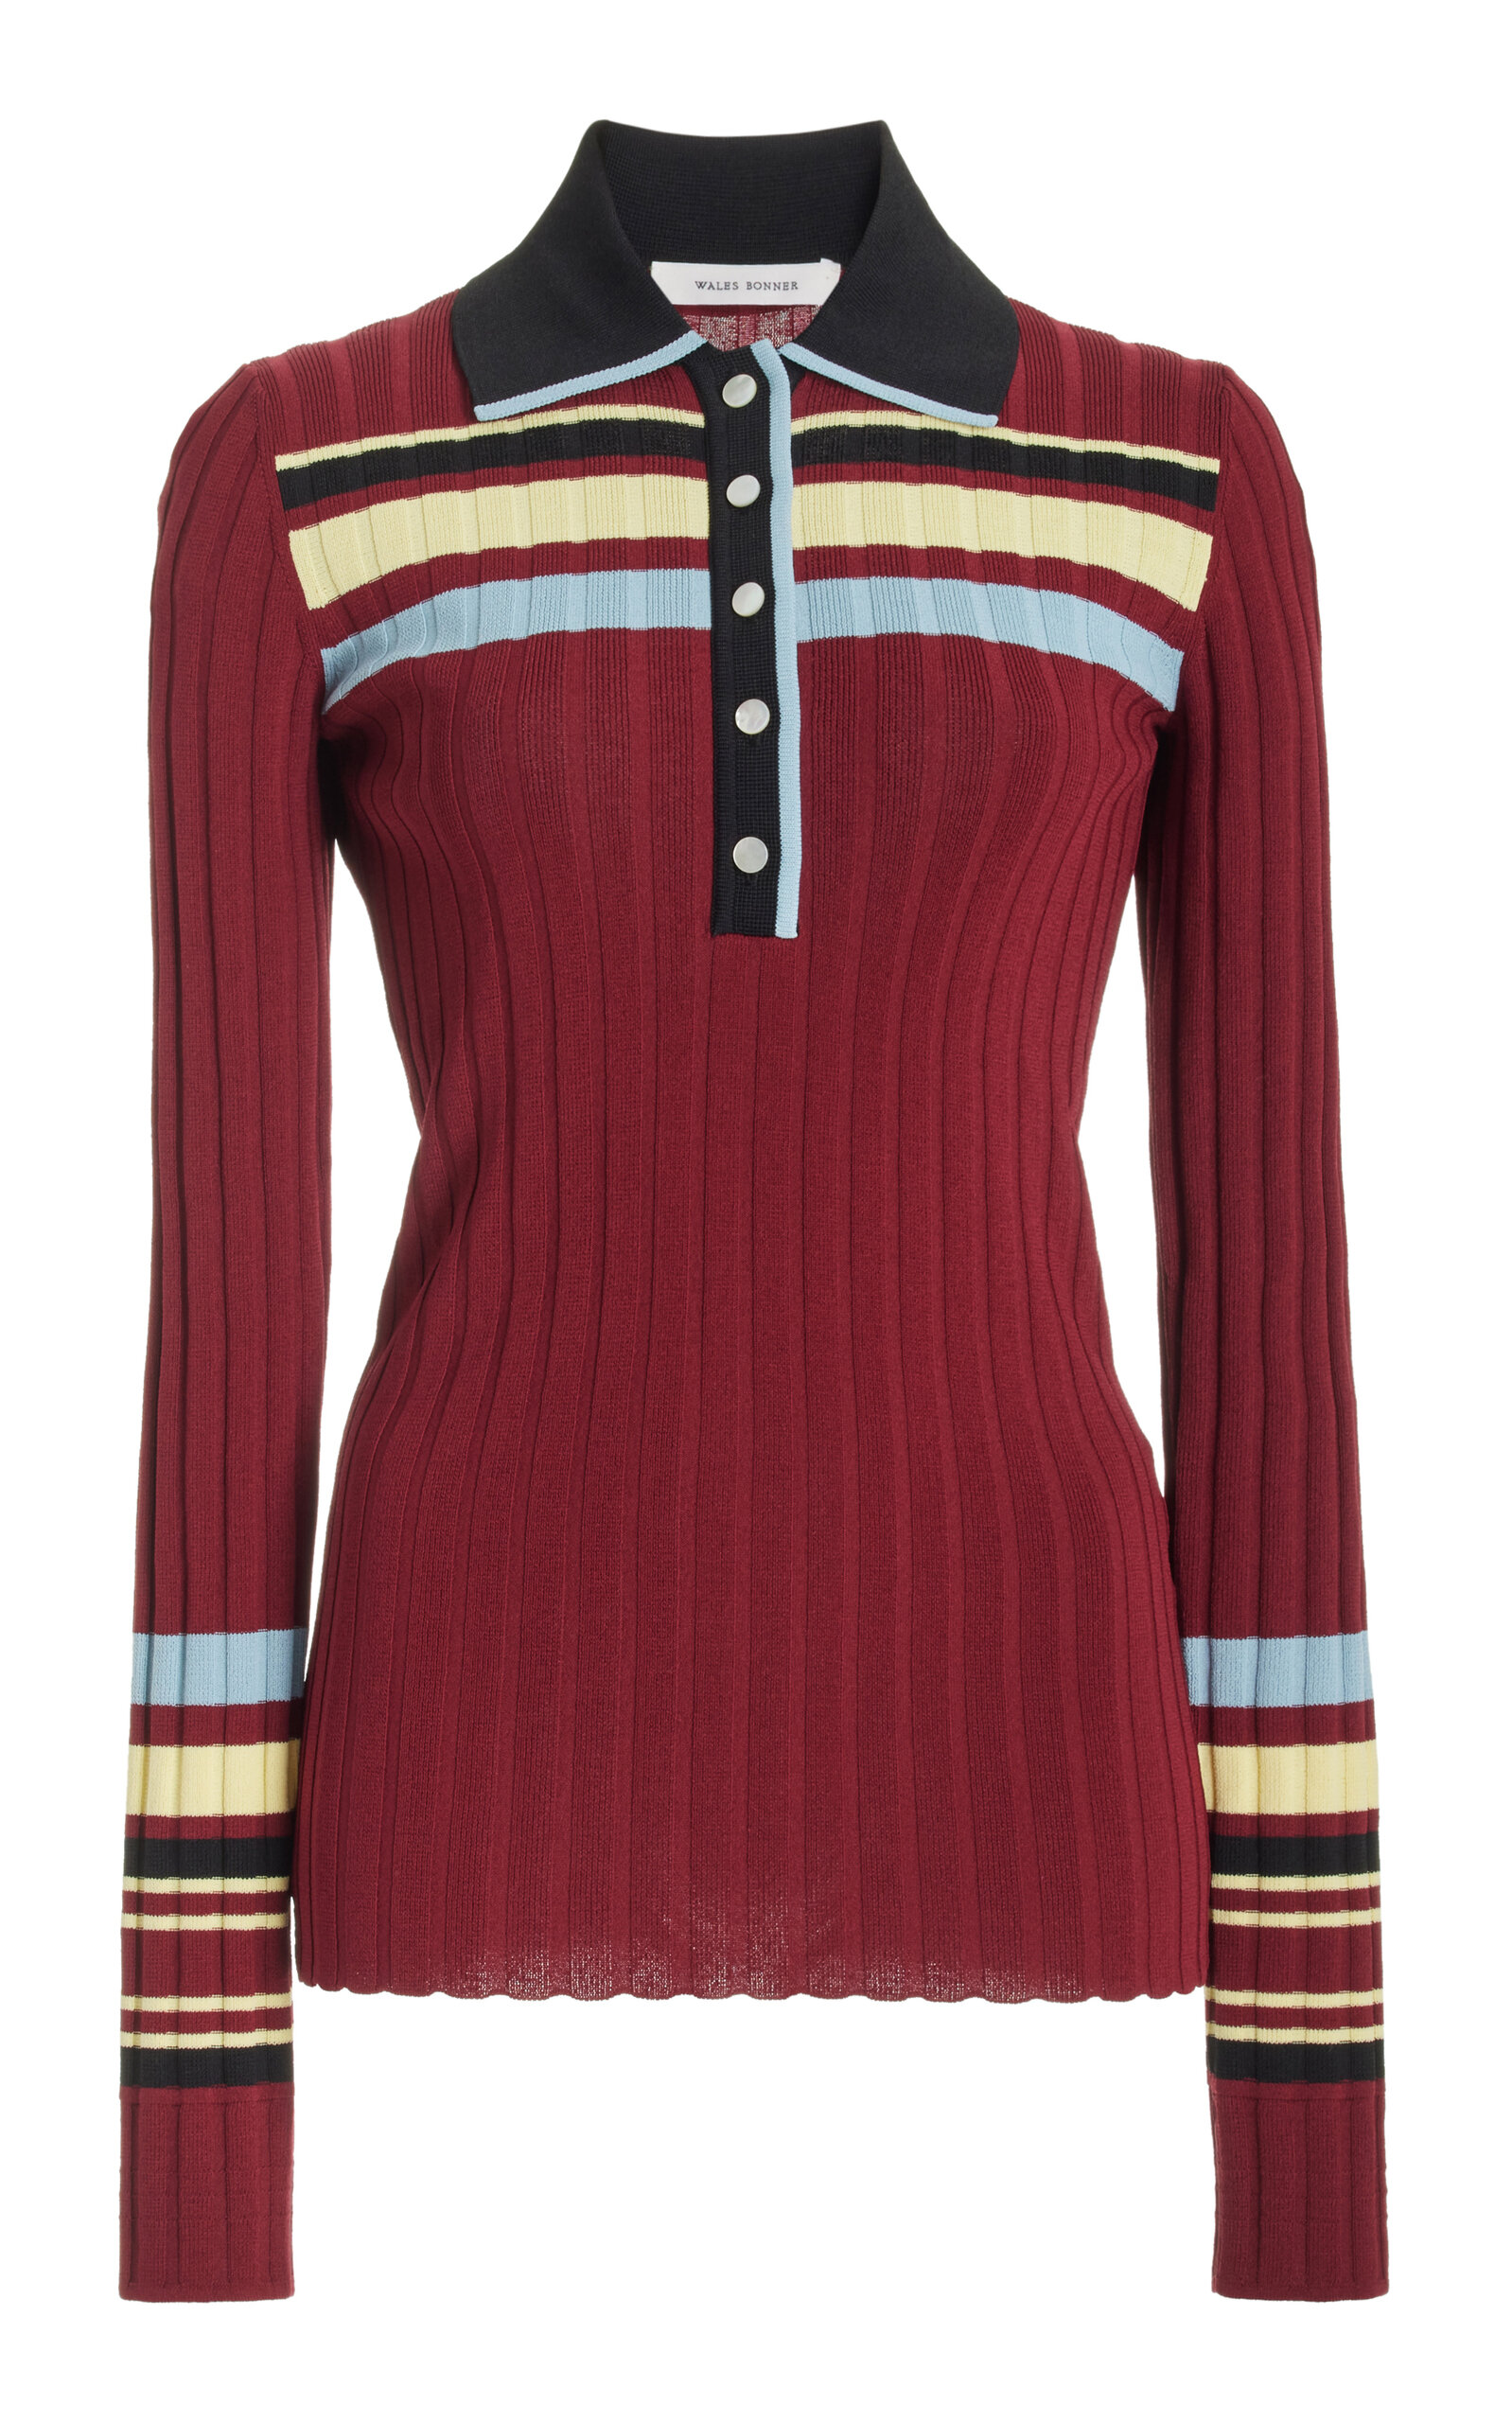 WALES BONNER WANDER STRIPED RIBBED-KNIT POLO TOP